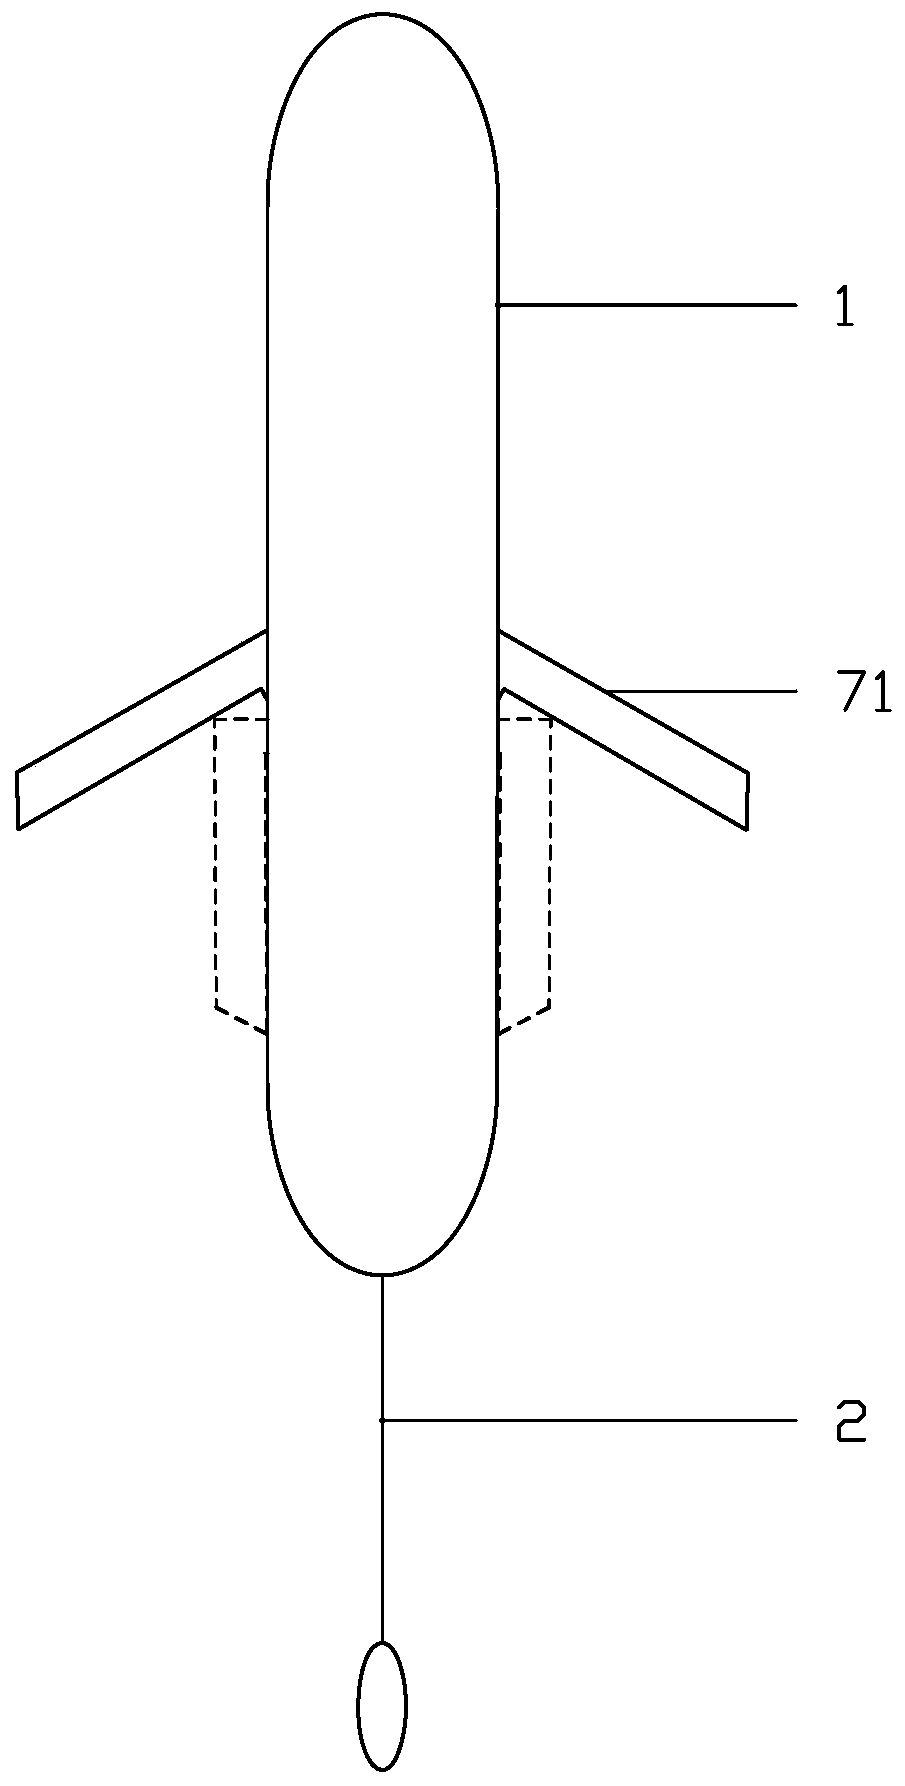 An air-dropped underwater glider based on electromagnetic wings